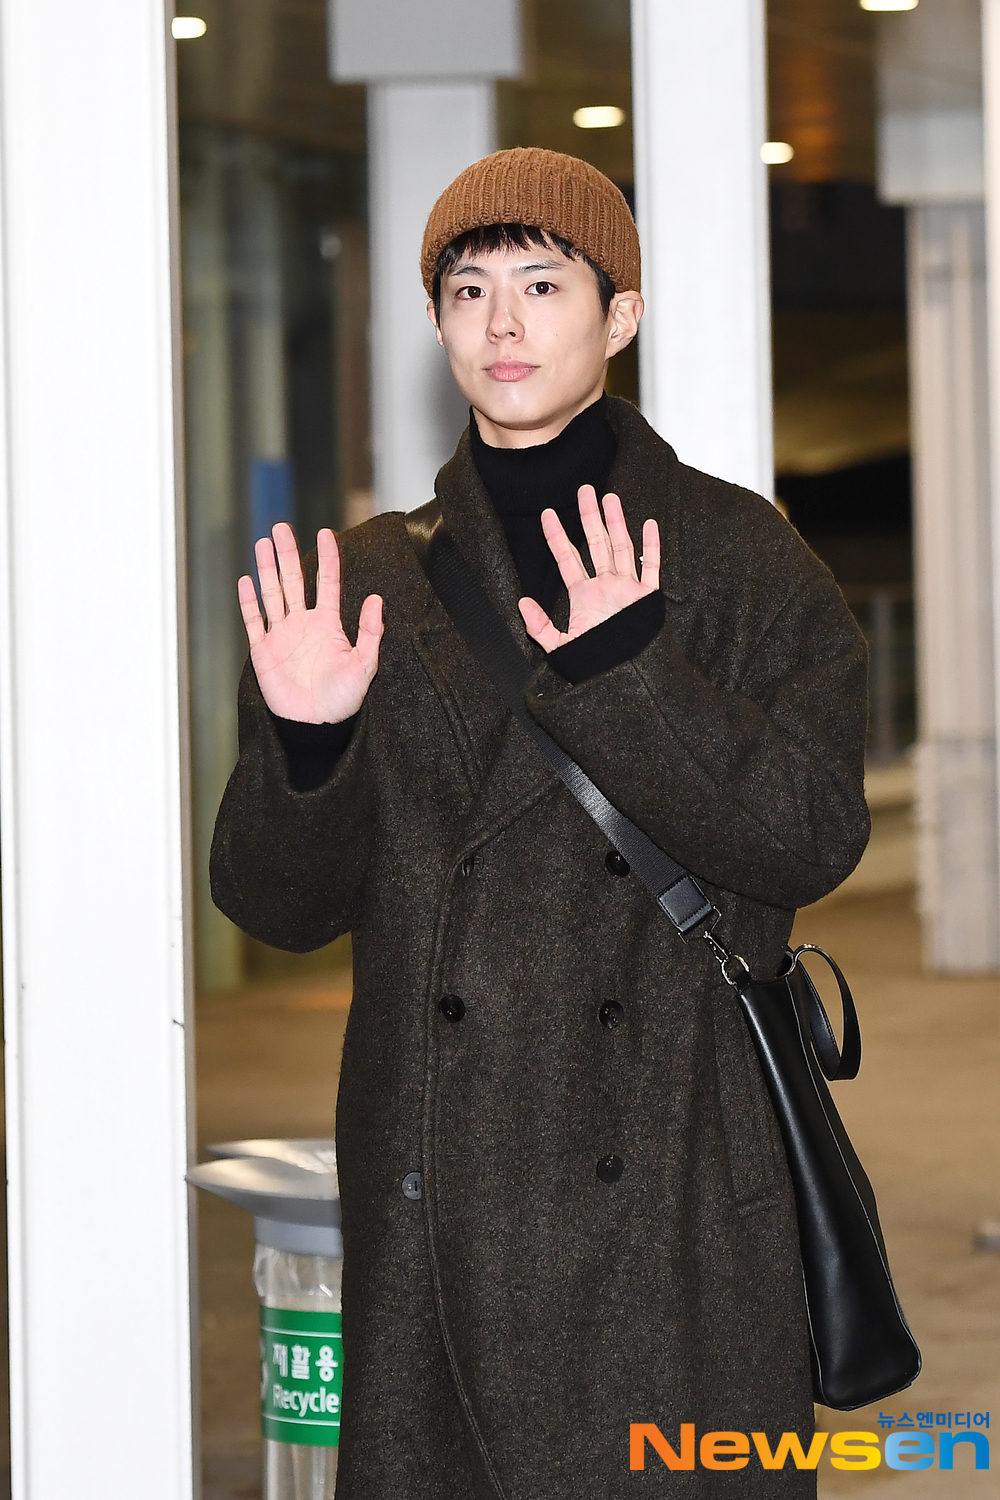 Actor Park Bo-gum (PARK BO GUM) departed for Nagoya, Japan, on December 4th (Wednesday) through Incheon International Airport in Unseo-dong, Jung-gu, Incheon, on the afternoon of December 3rd to attend the 2019 MAMA (Mnet Asian Music Awards 2019 Mnet Asian Music Awards) schedule.Actor Park Bo-gum (PARK BO GUM) is leaving for Japan.exponential earthquake